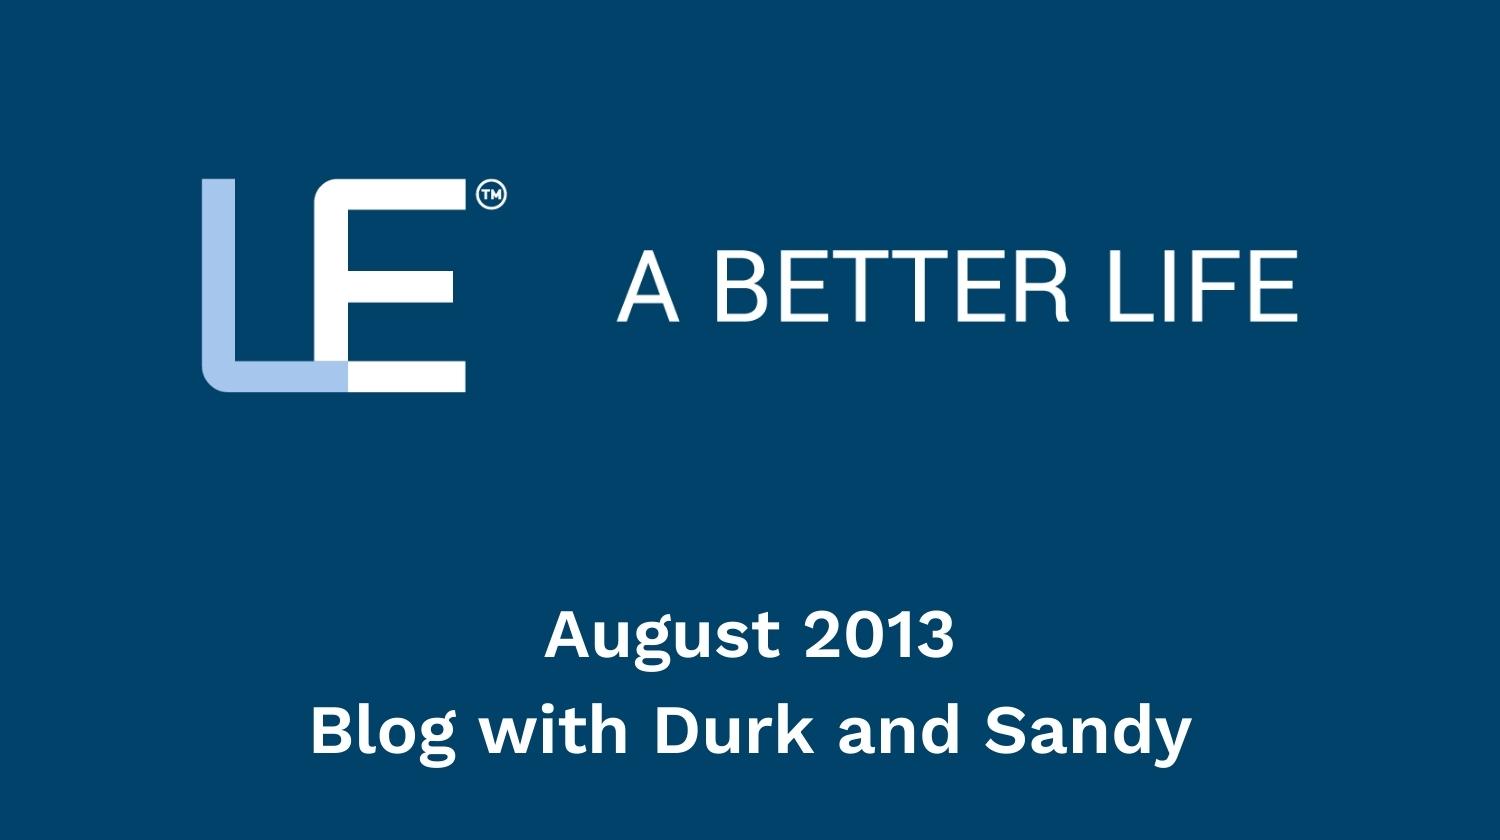 August 2013 Blog with Durk and Sandy